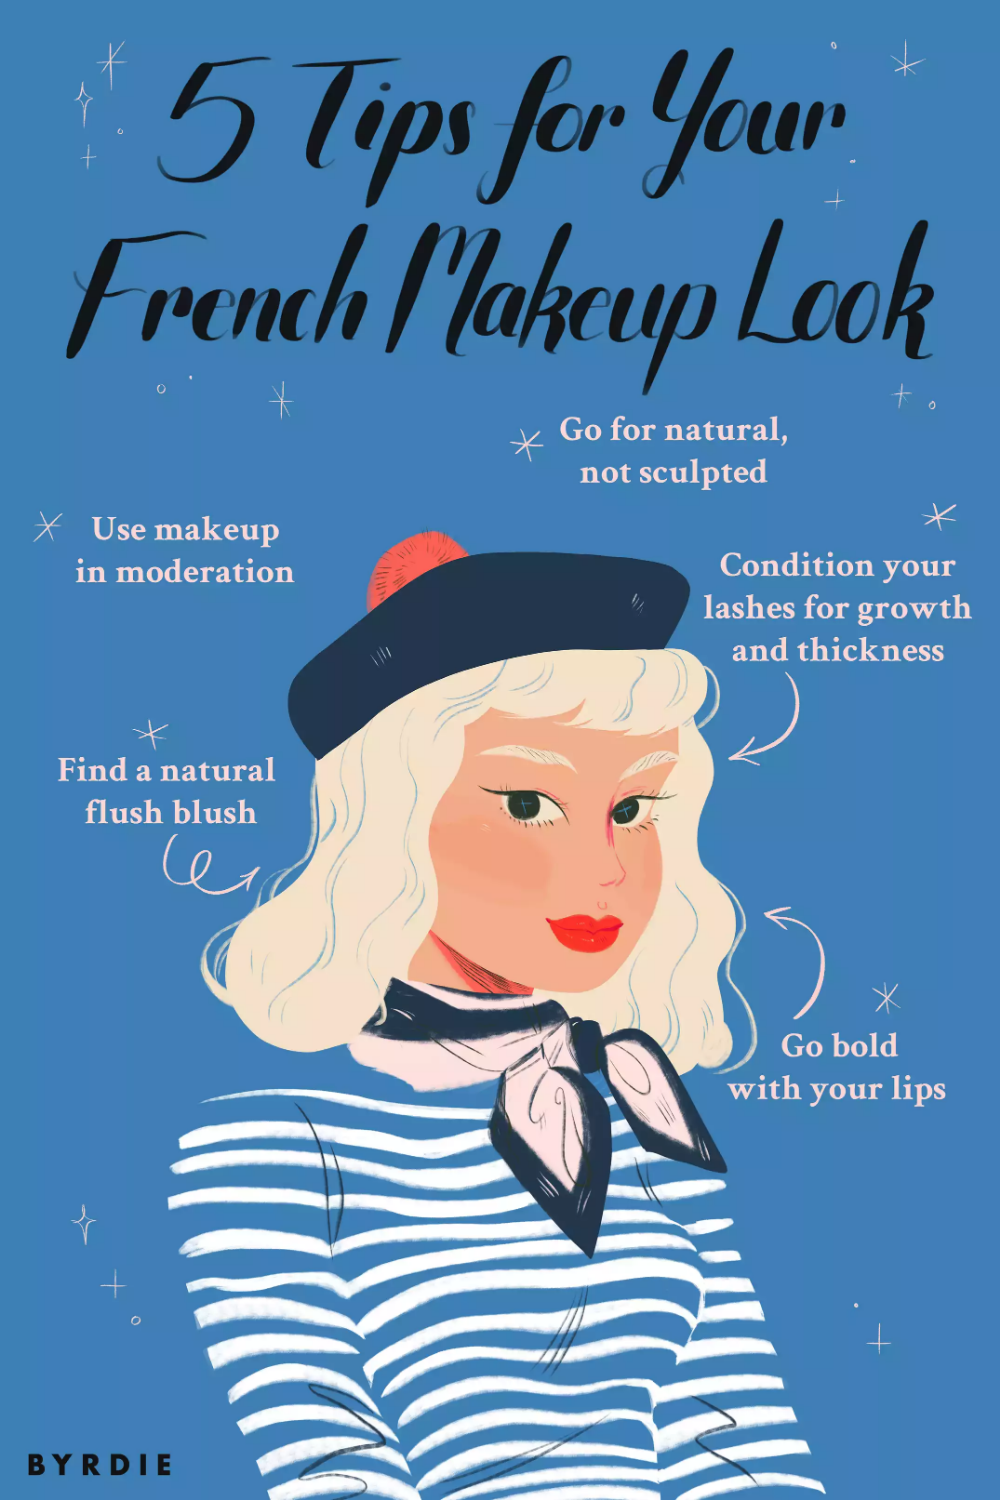 16 style French makeup ideas